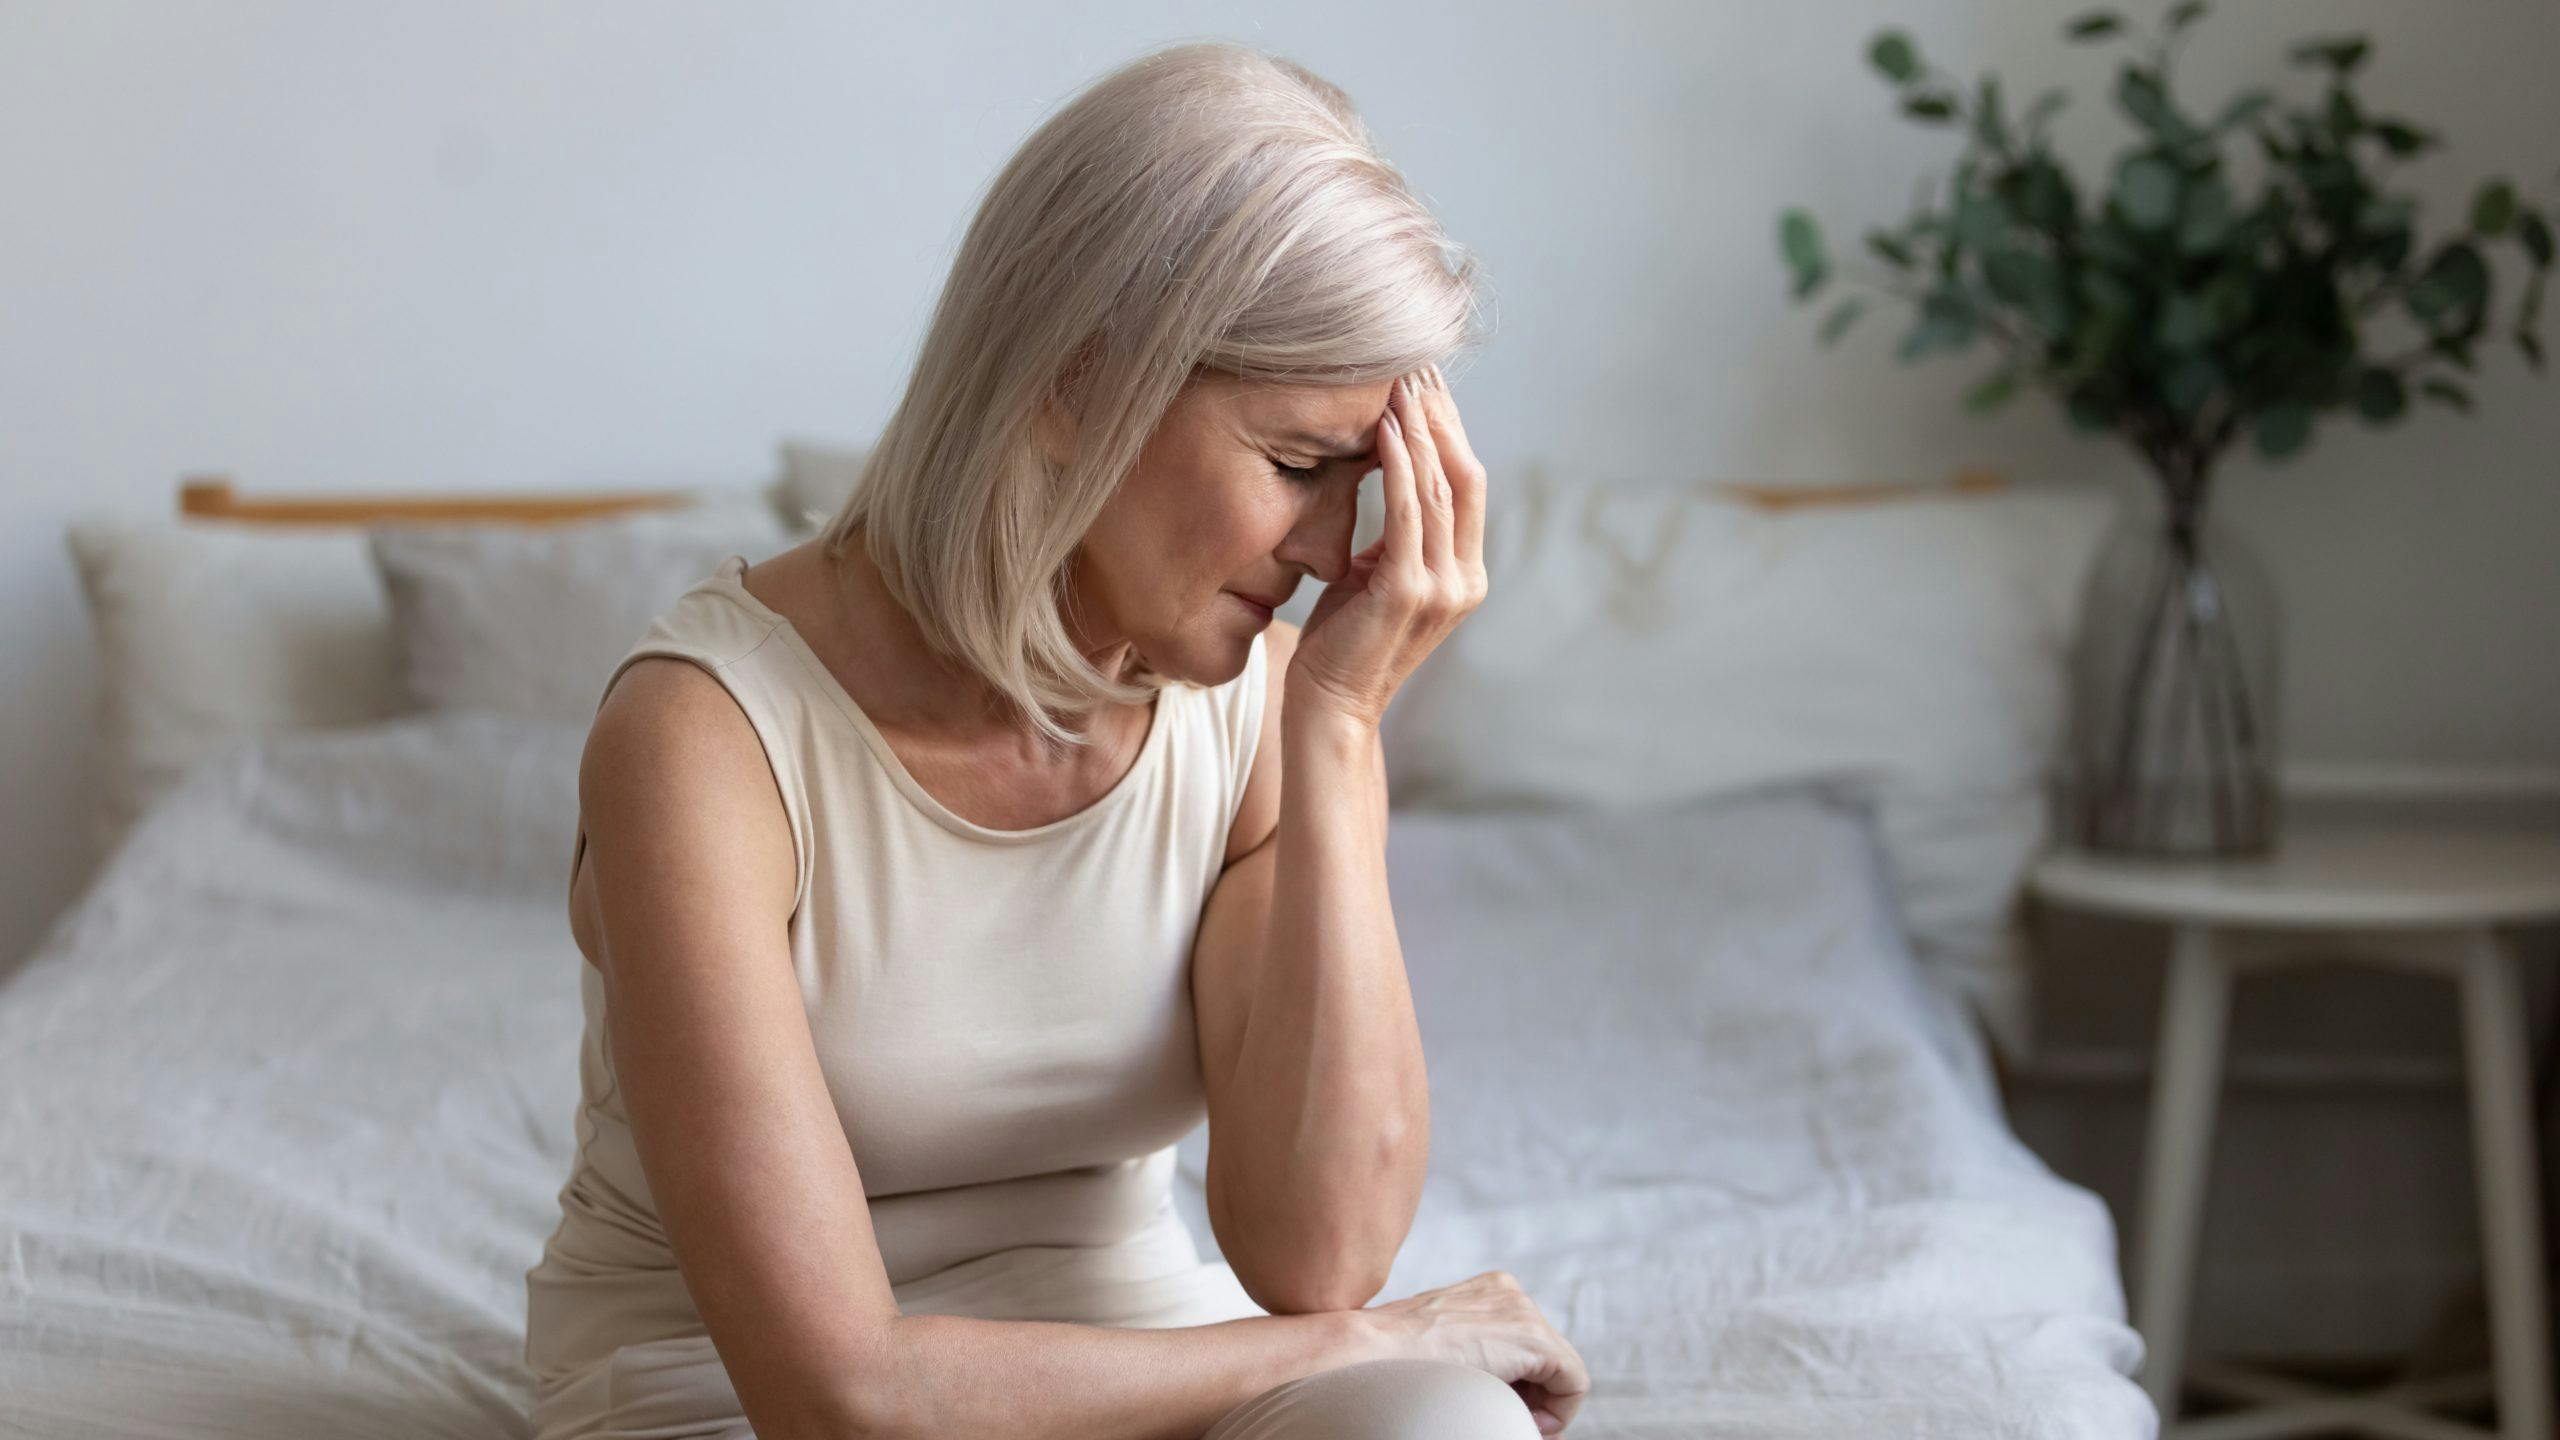 Women dealing with Menopause symptoms such as headache and fatigue